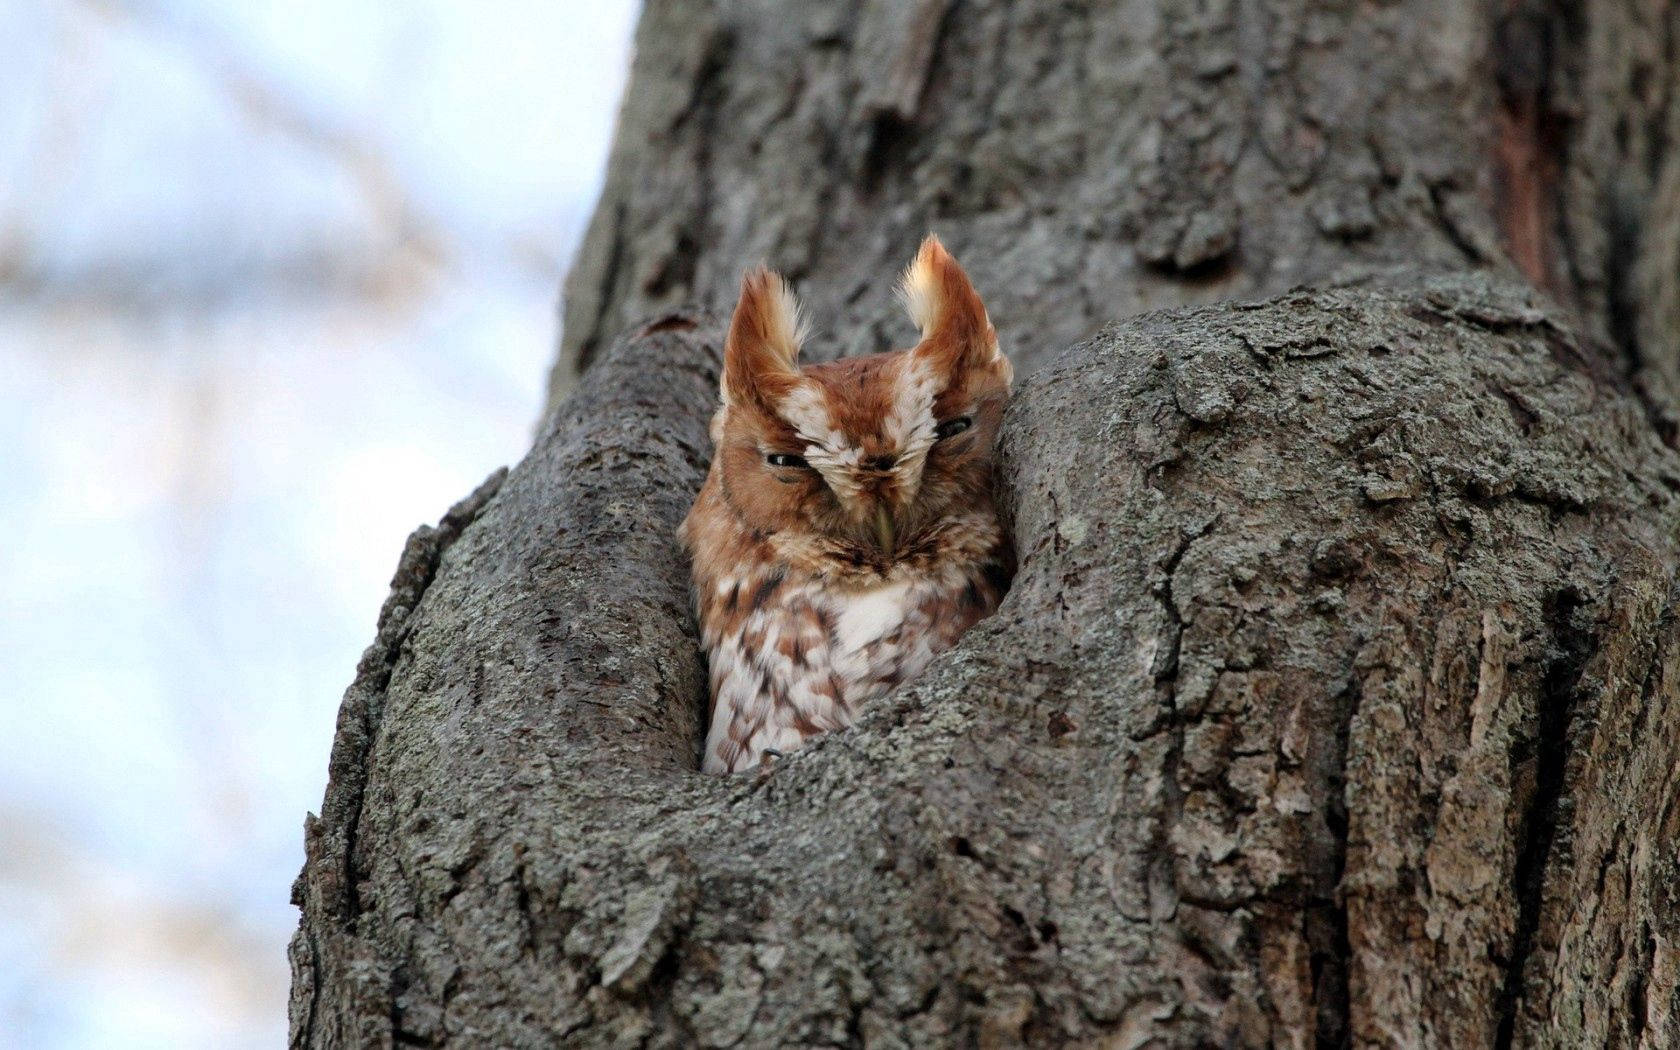 A wise old owl hoots from a tree hole. Wallpaper